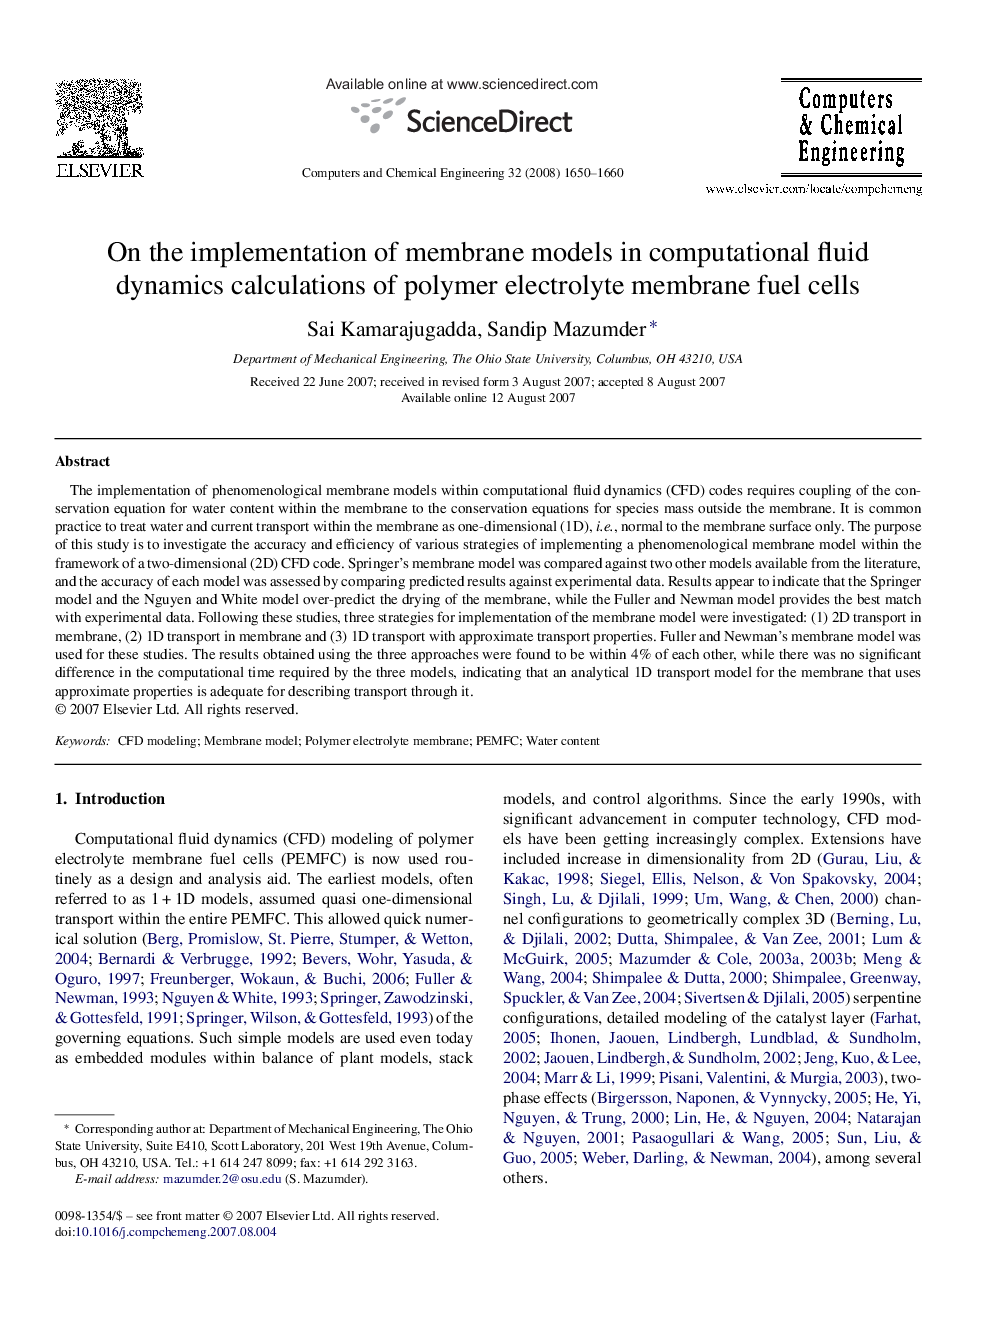 On the implementation of membrane models in computational fluid dynamics calculations of polymer electrolyte membrane fuel cells